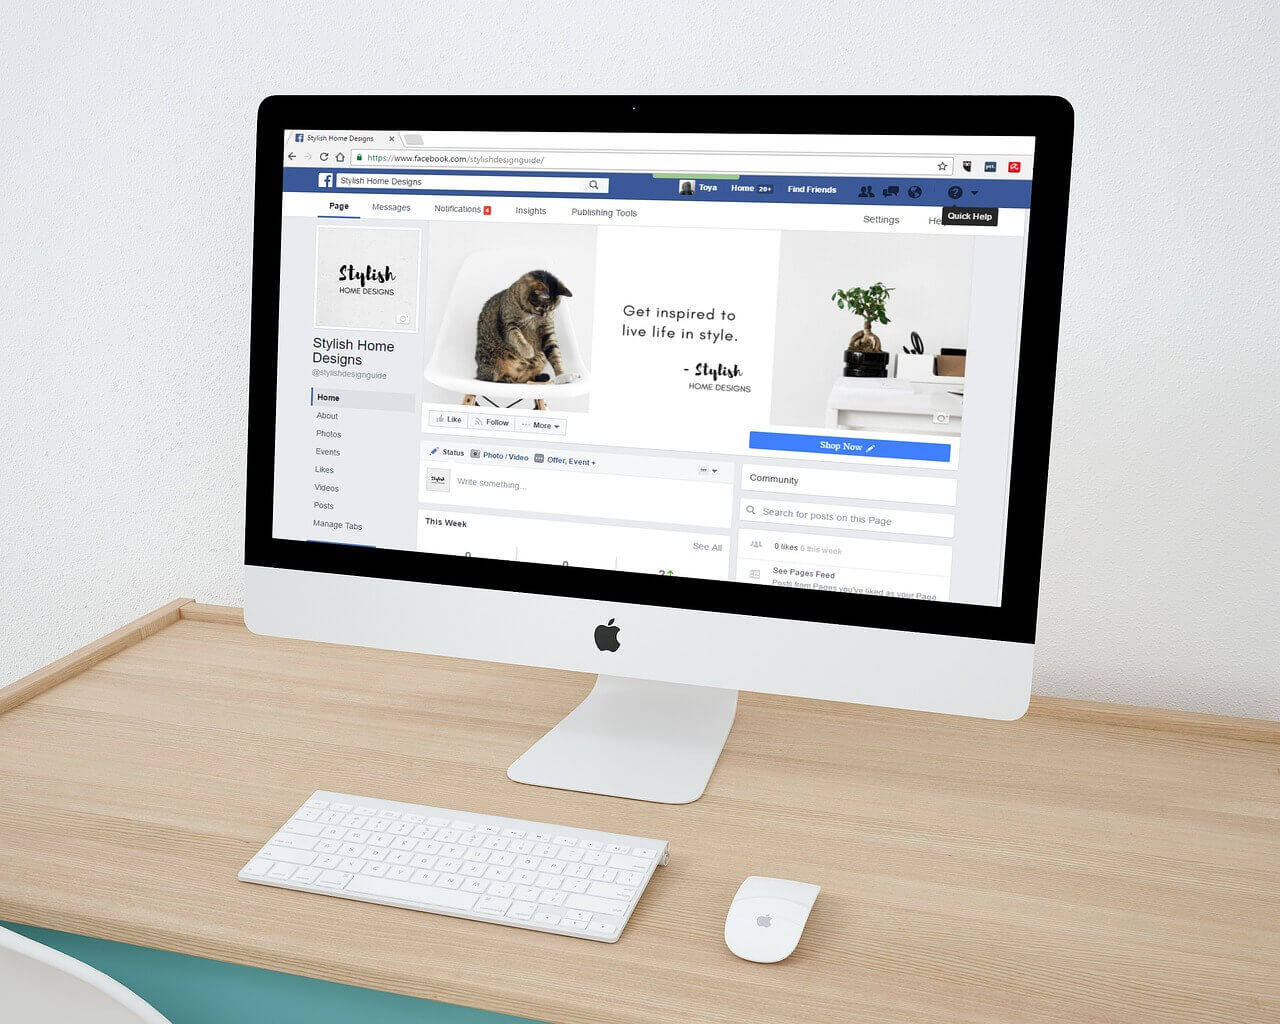 Do You Need a Business License to Sell on Facebook?